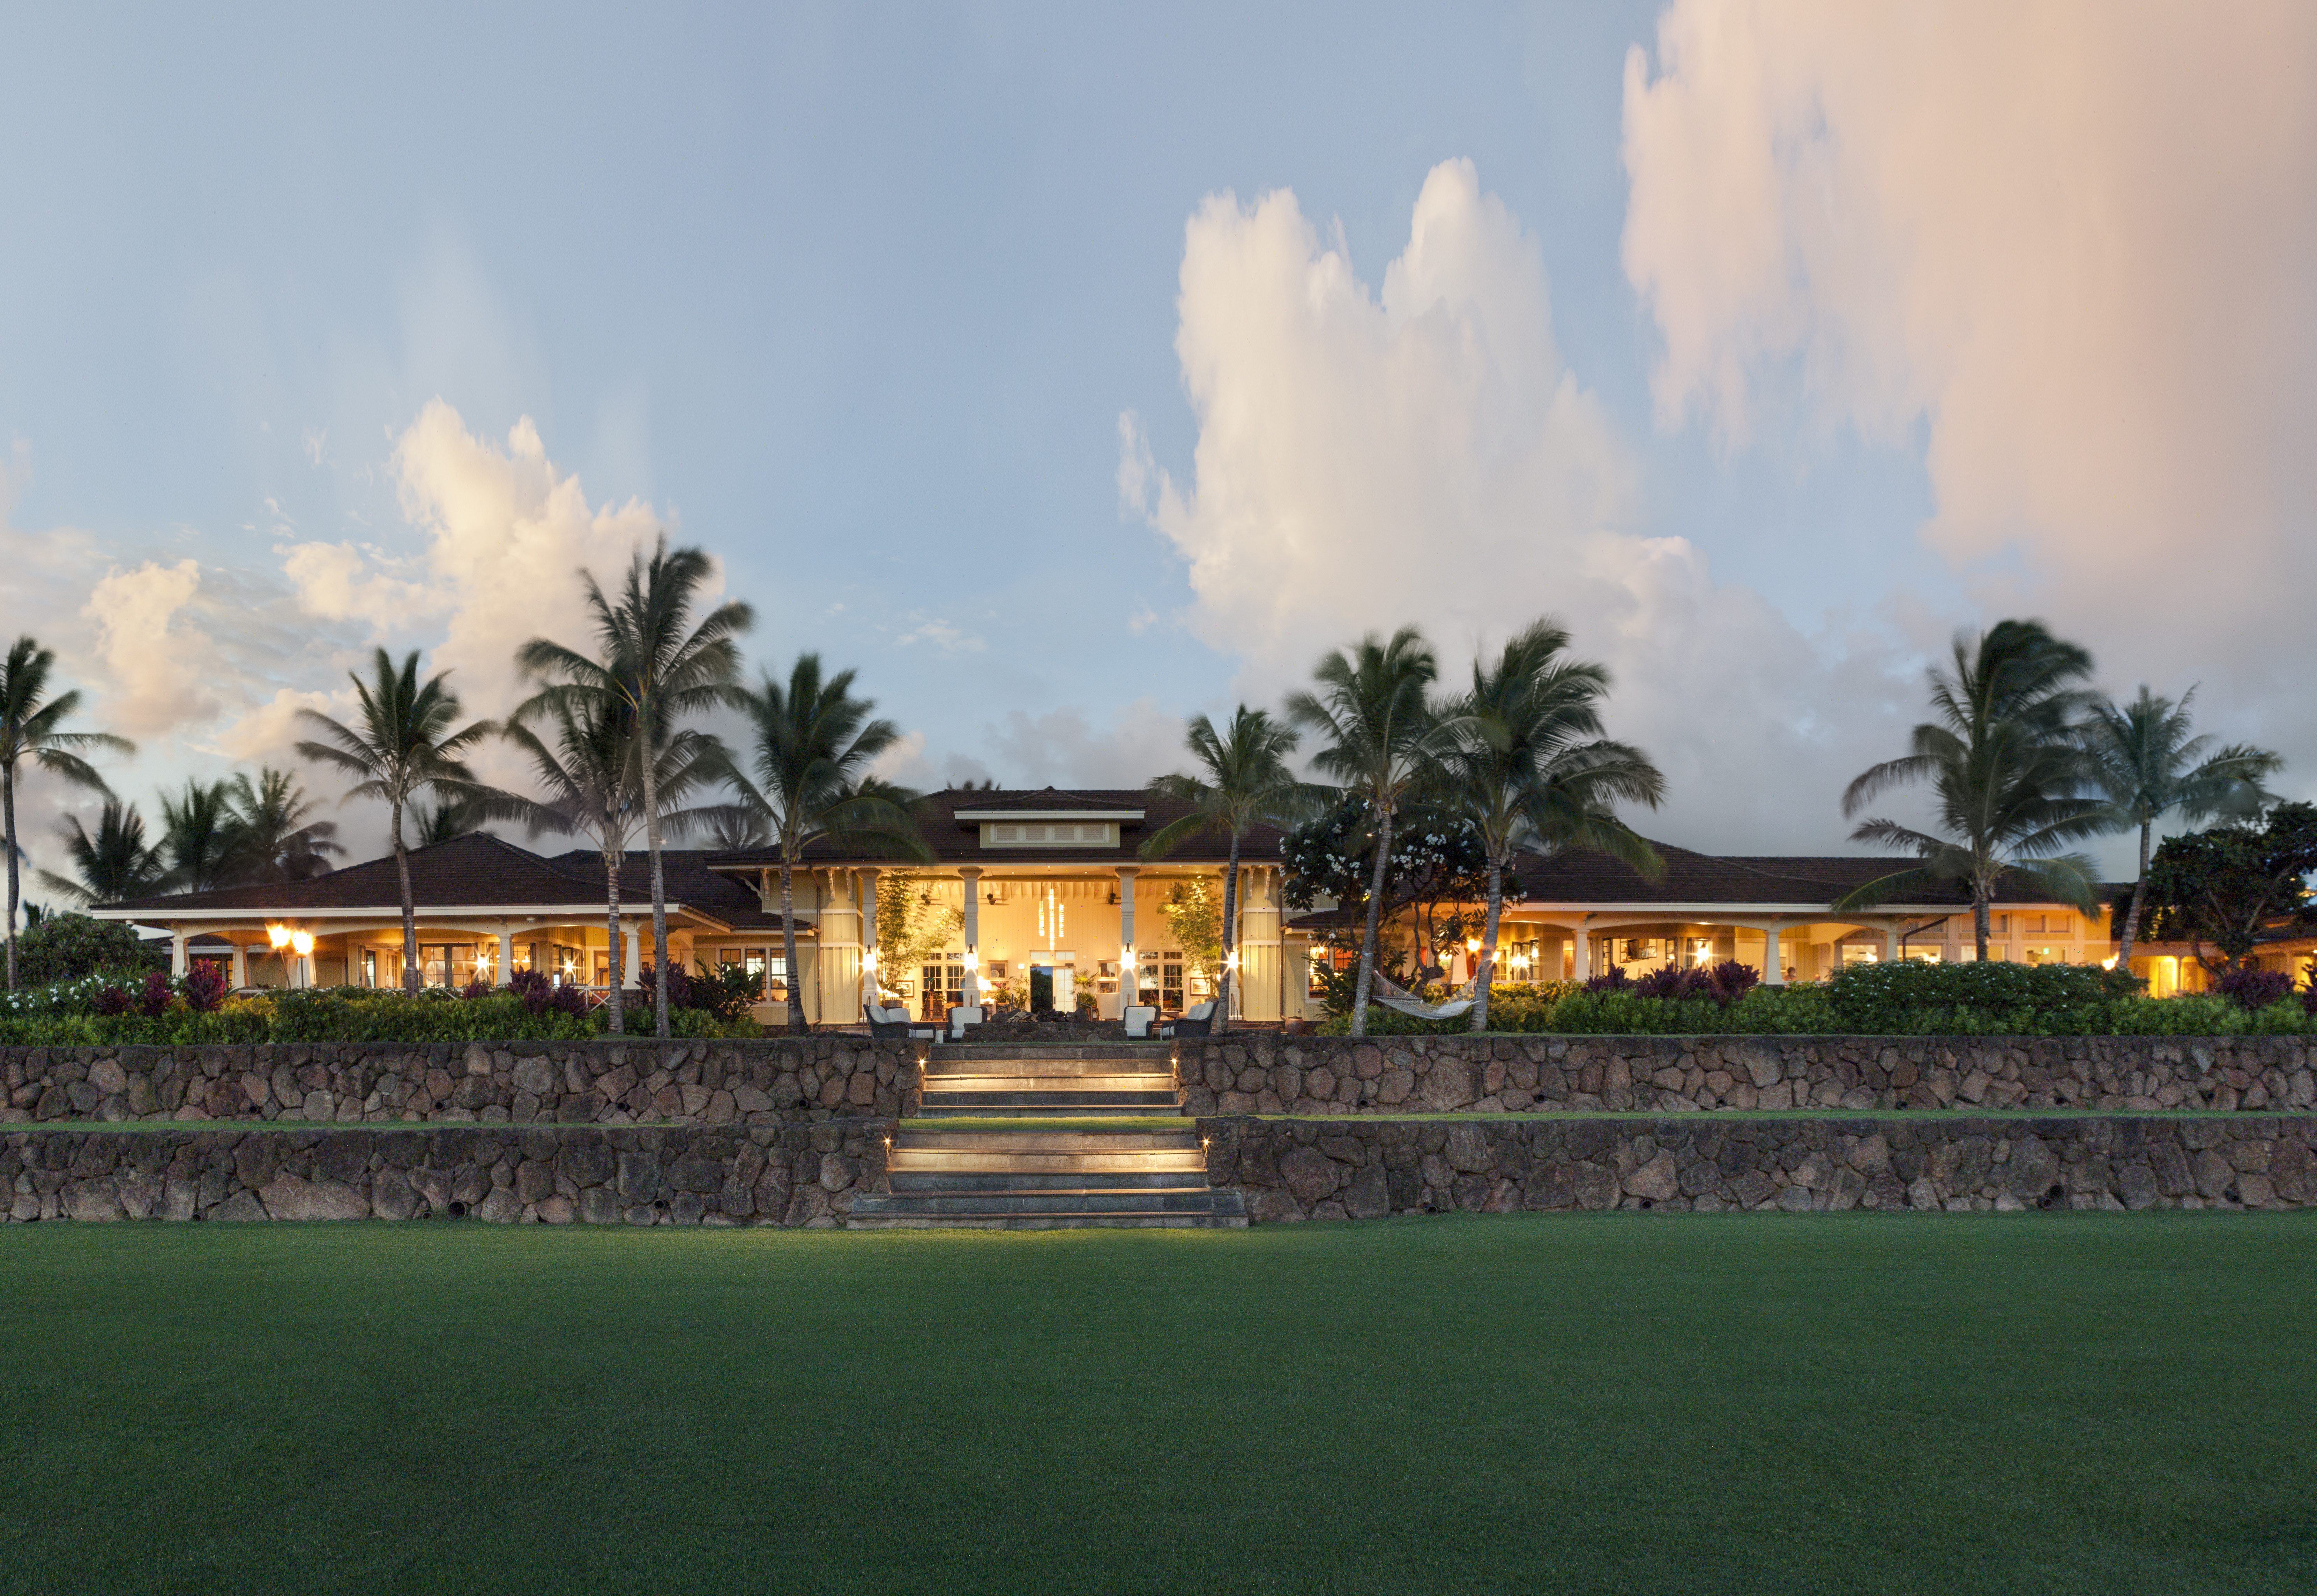 Kukuiula Club for Members and their Guests